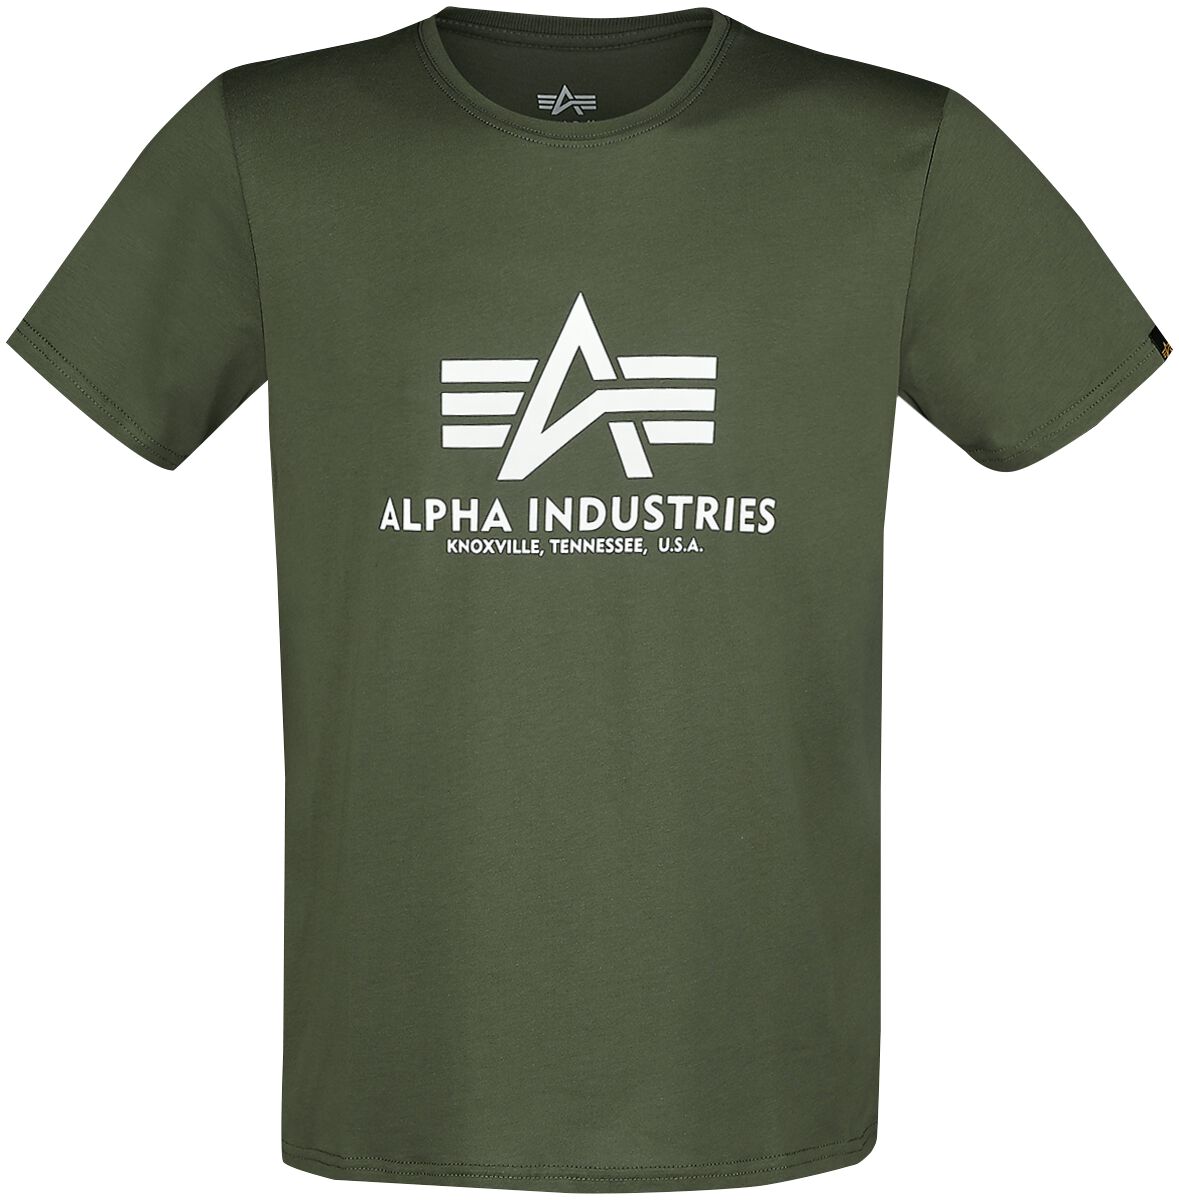 Image of T-Shirt di Alpha Industries - Basic t-shirt - S a XXL - Uomo - verde scuro